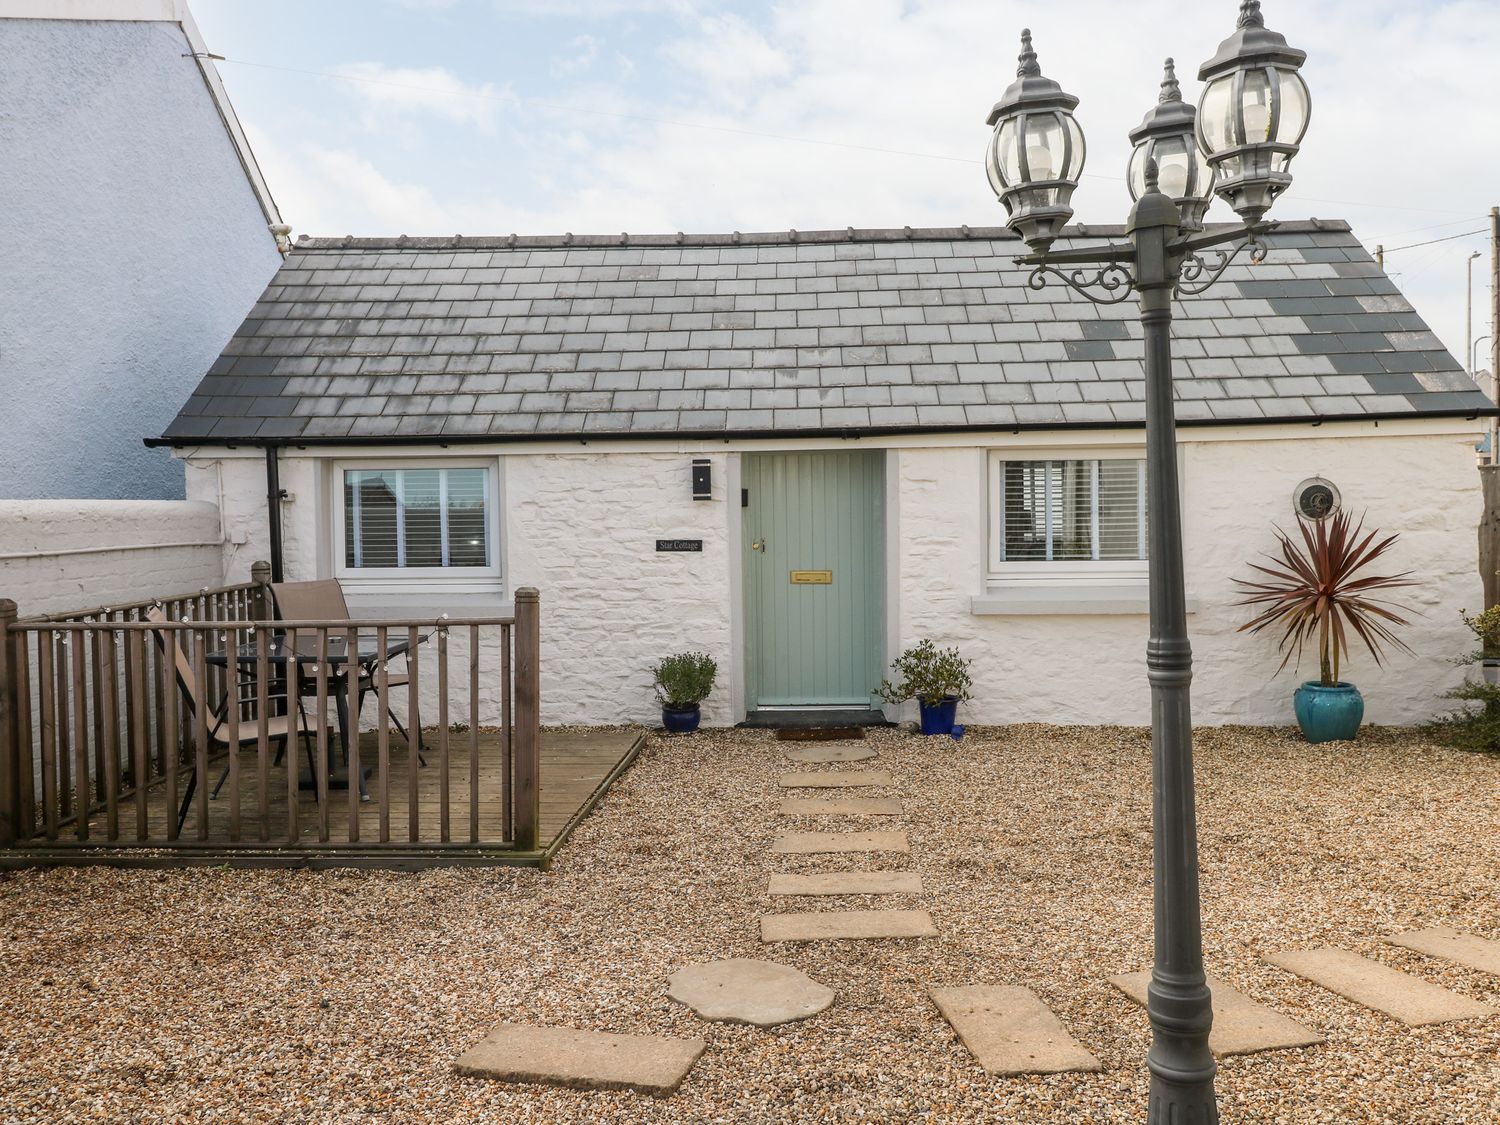 Star Cottage - South Wales - 1089842 - photo 1